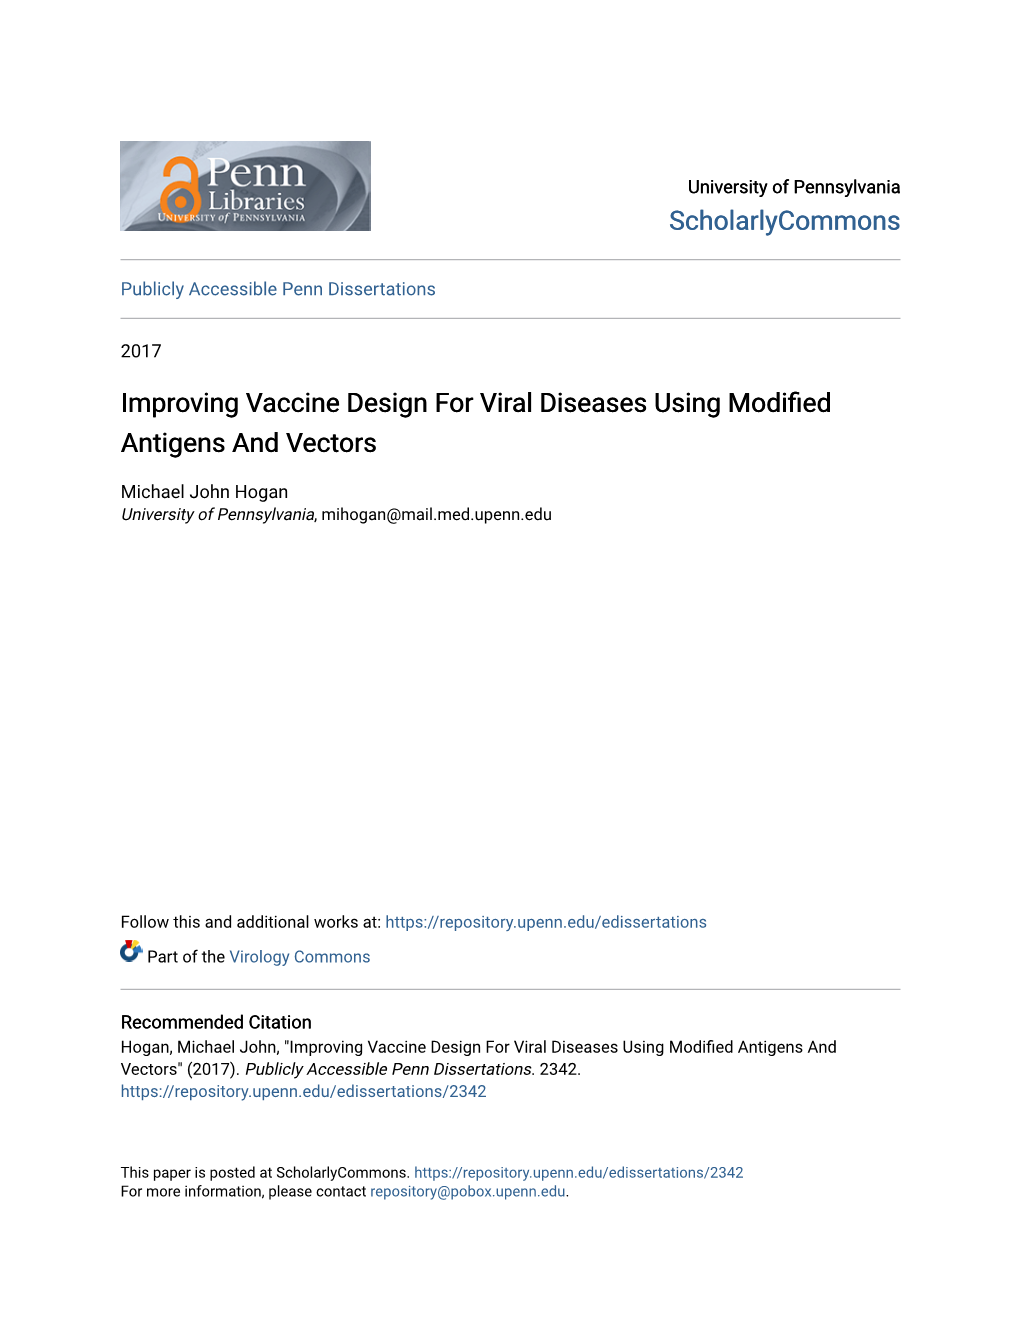 Improving Vaccine Design for Viral Diseases Using Modified Antigens and Vectors